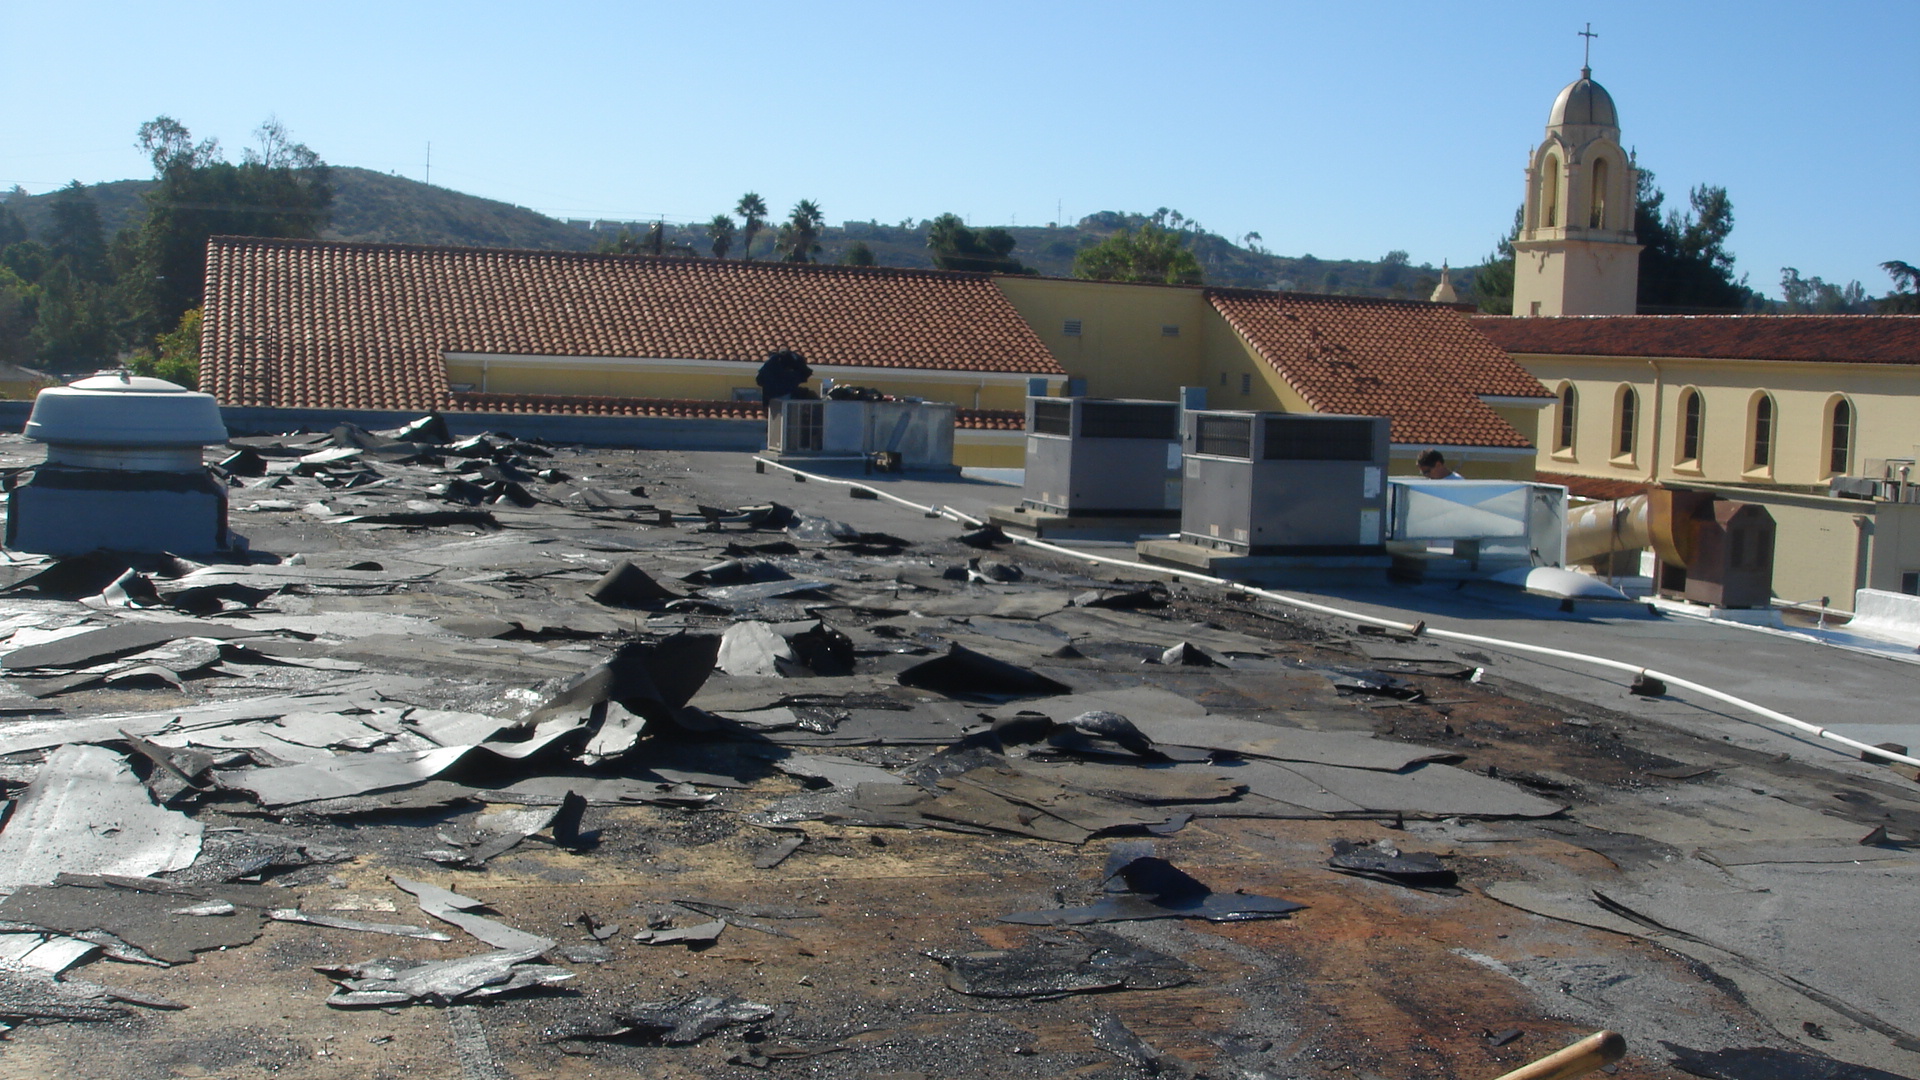 Re-Roofing and Roof Restoration | Commercial and Industrial Re-Roofing and Roof Restoration in California | Commercial and Industrial Re-Roofing and Roof Restoration in Nevada | Commercial and Industrial Re-Roofing and Roof Restoration in Arizona